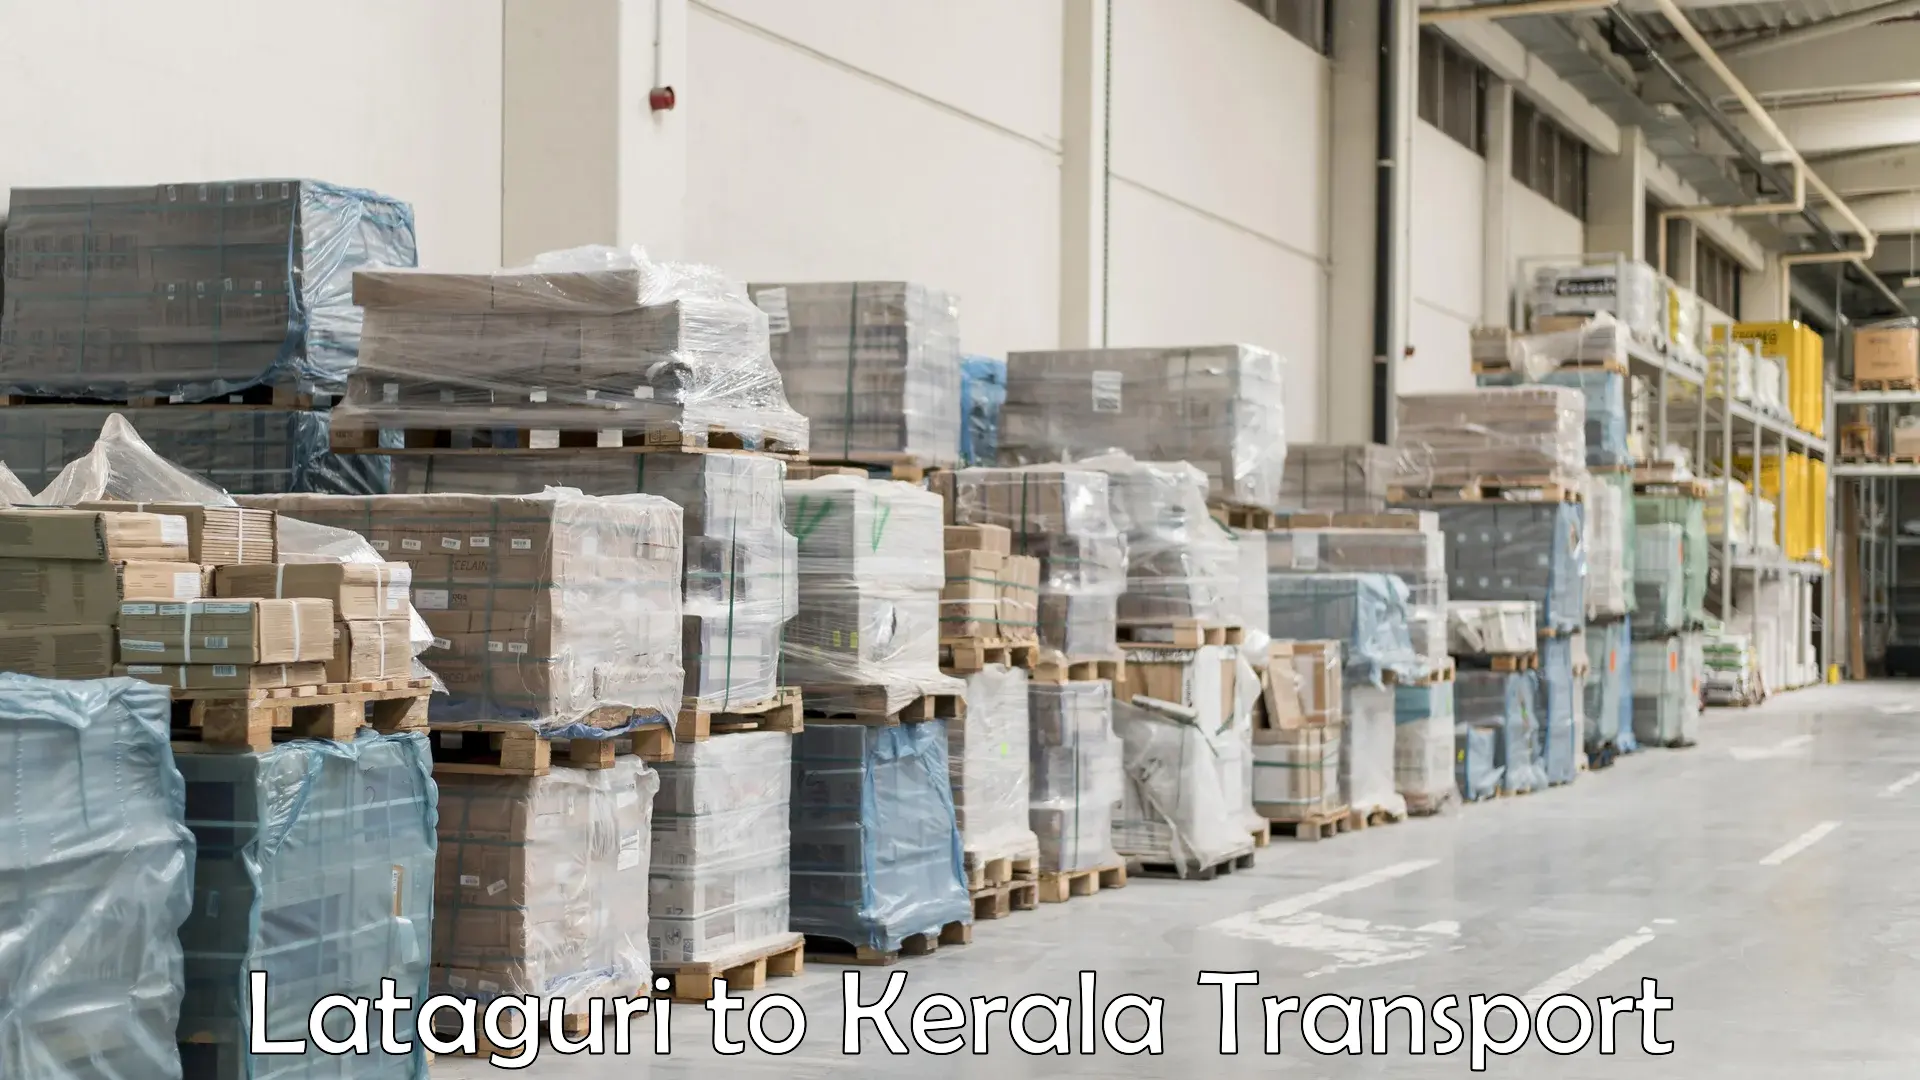 Transport bike from one state to another in Lataguri to Kerala